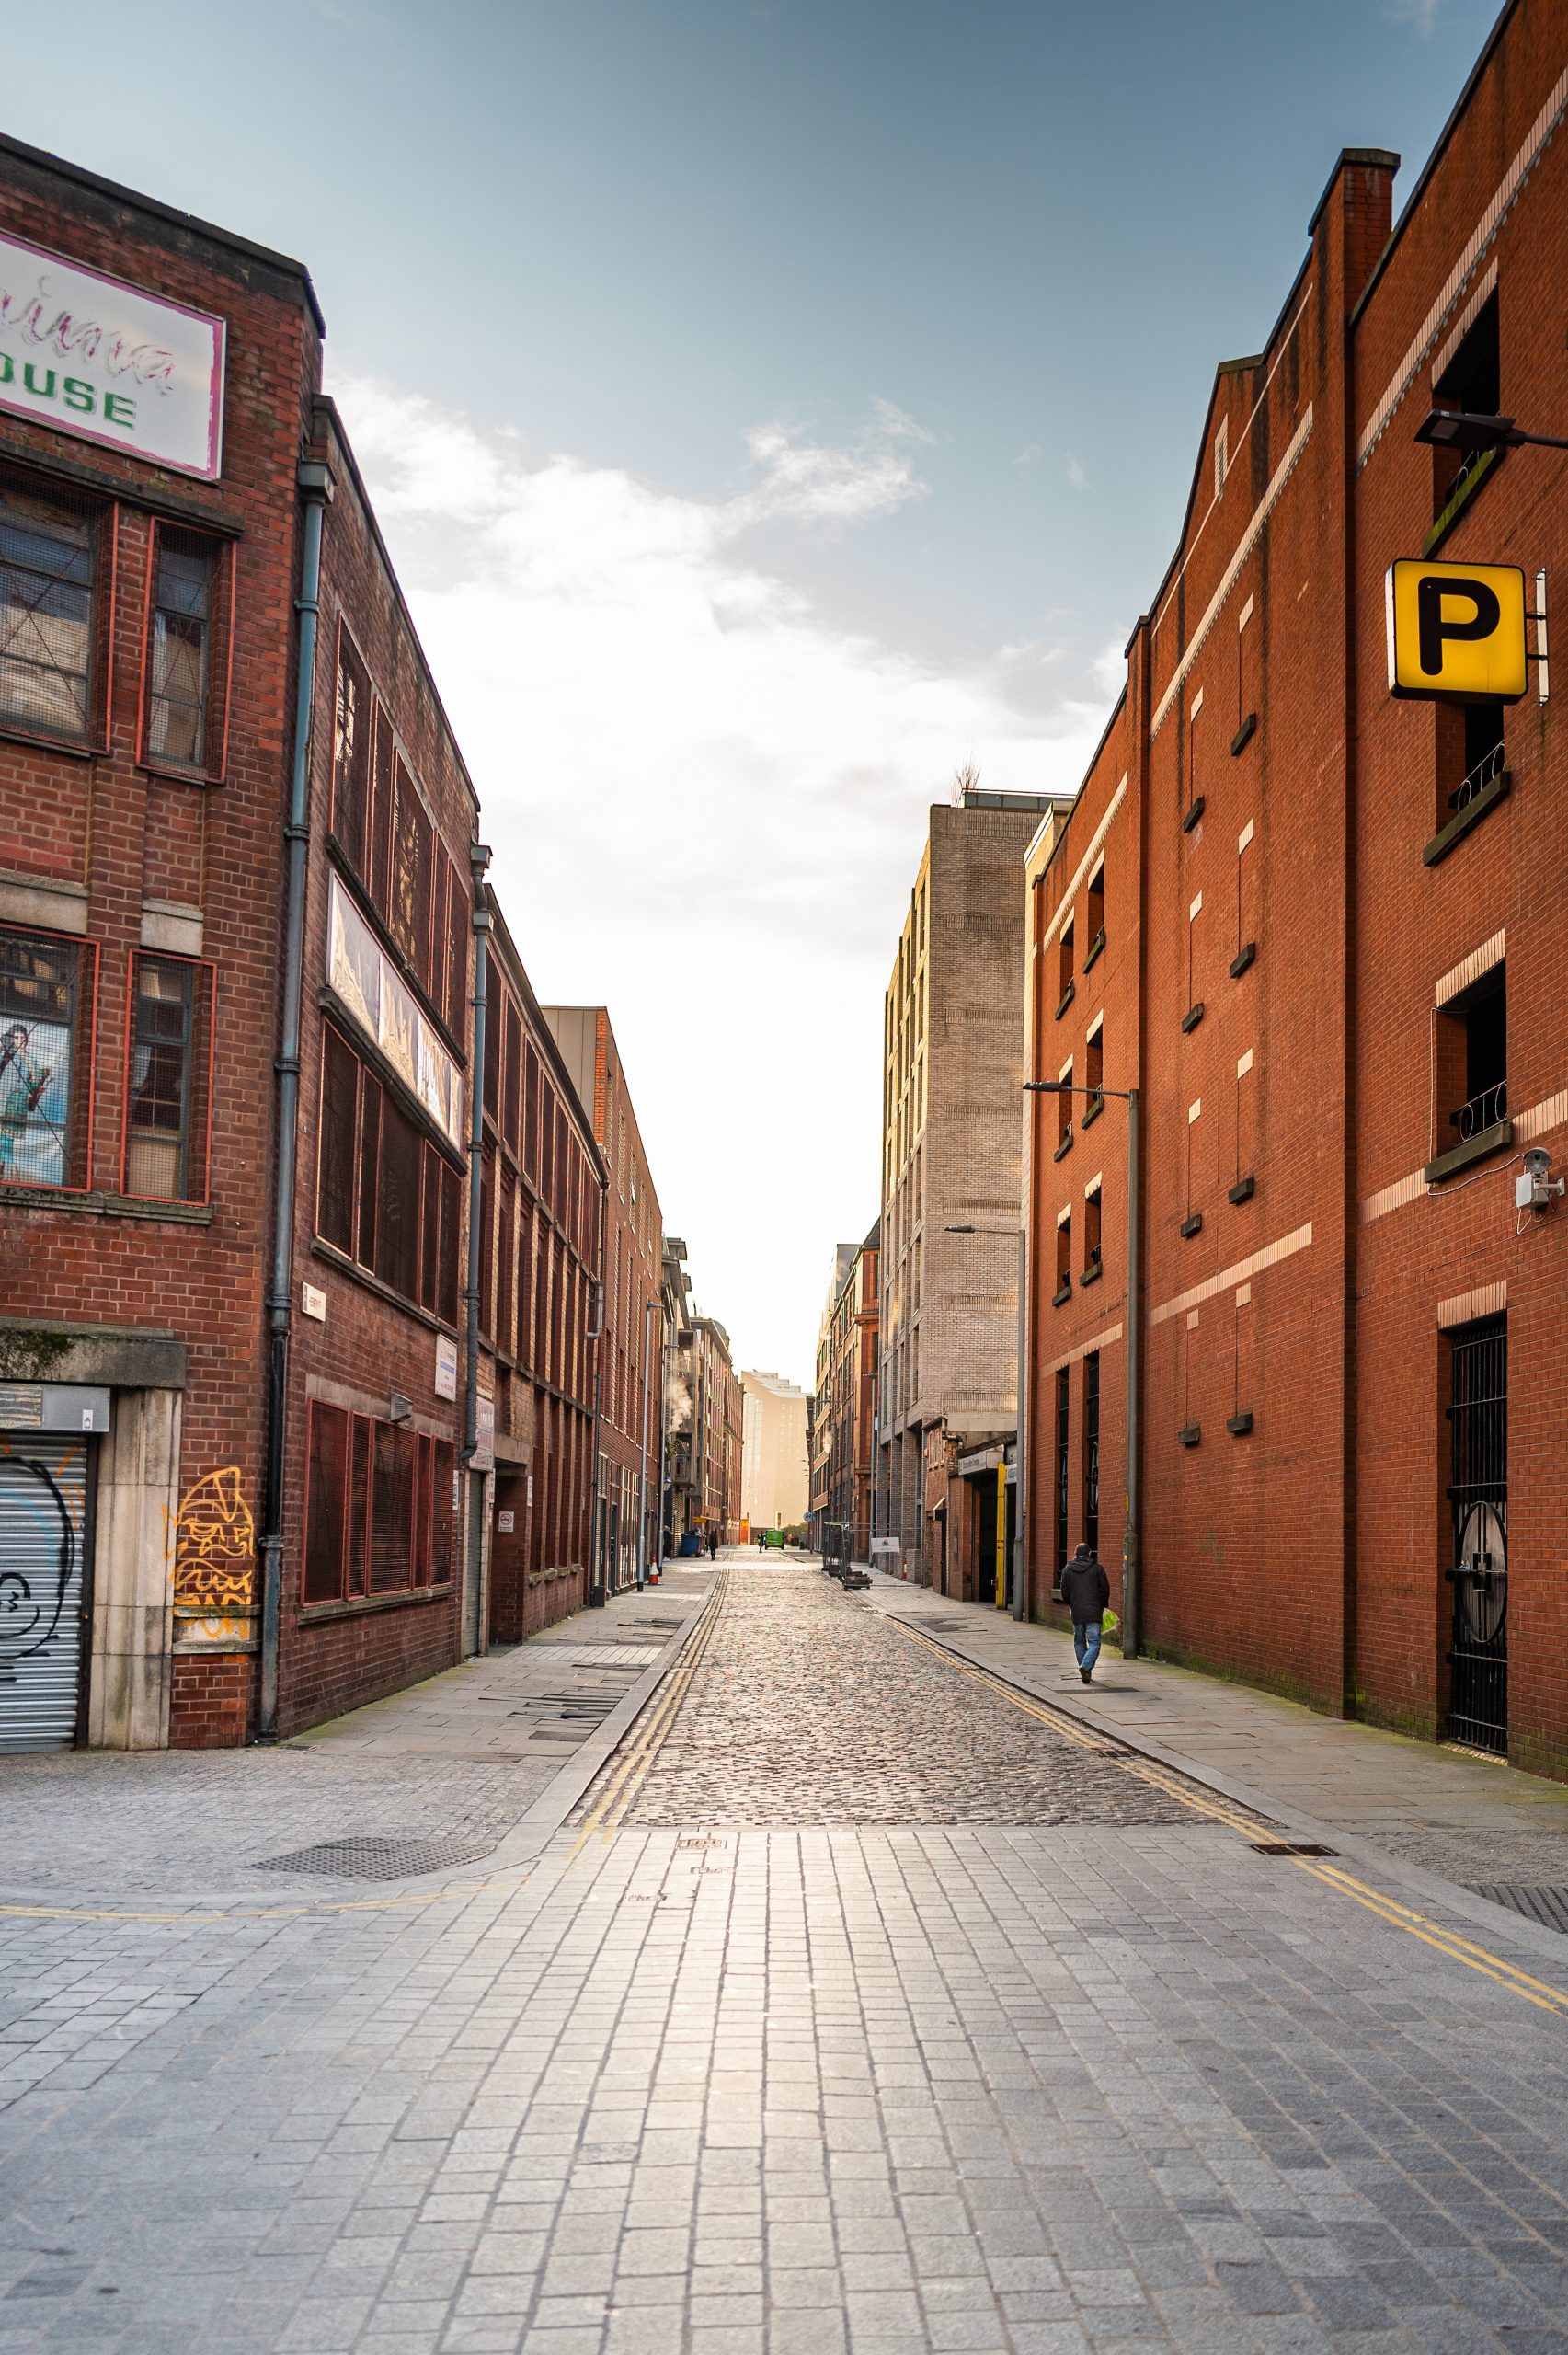 Ancoats in Manchester